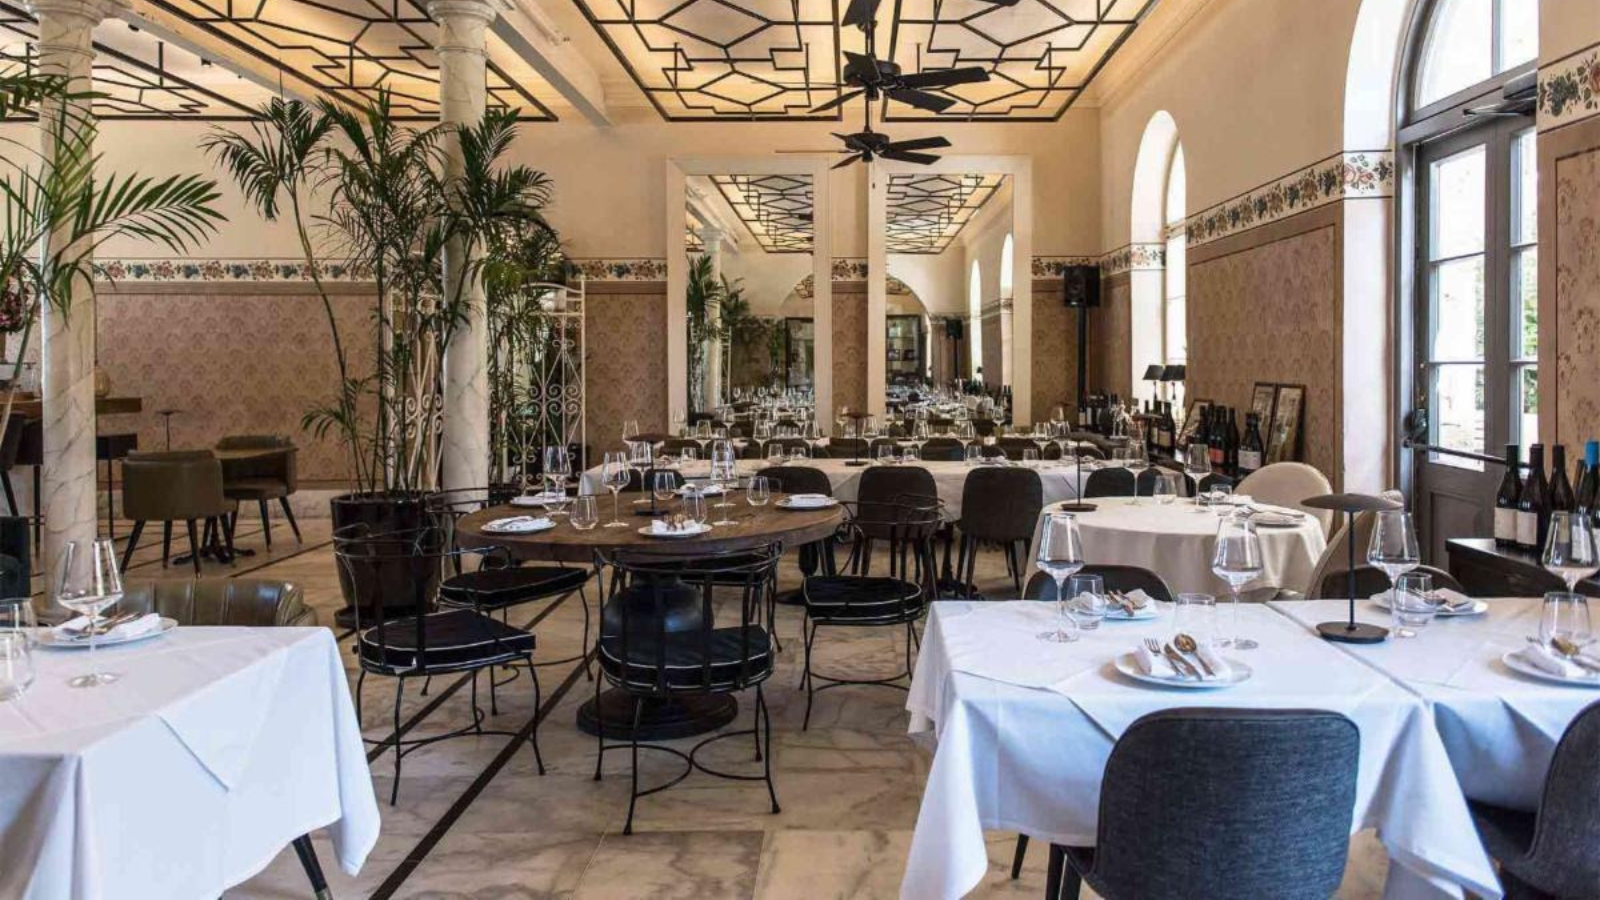 The George & John restaurant in Tel Avivâ€™s Drisco Hotel may be up for a Michelin star. Photo courtesy of Drisco Hotel